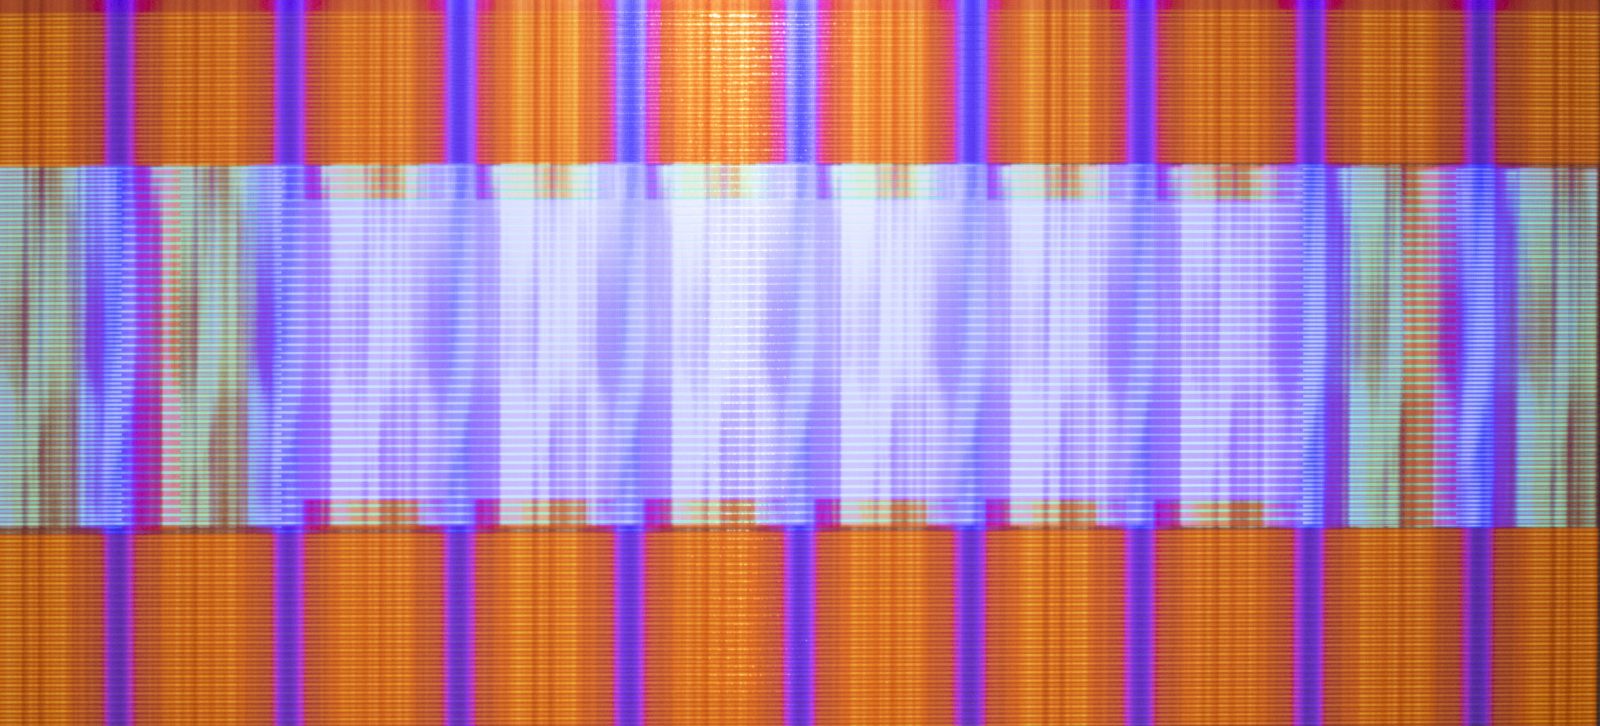 Like an animated painting, Electr-O-Pura projects a digital animation atop a painted aluminum panel to produce a colorful geometric abstraction in motion. When the digital animation is turned off, the hard-edge painting exists independently in its frozen state. When turned on, the digital projection is designed to visually interact with its painted substrate, initiating a live optical illusion.